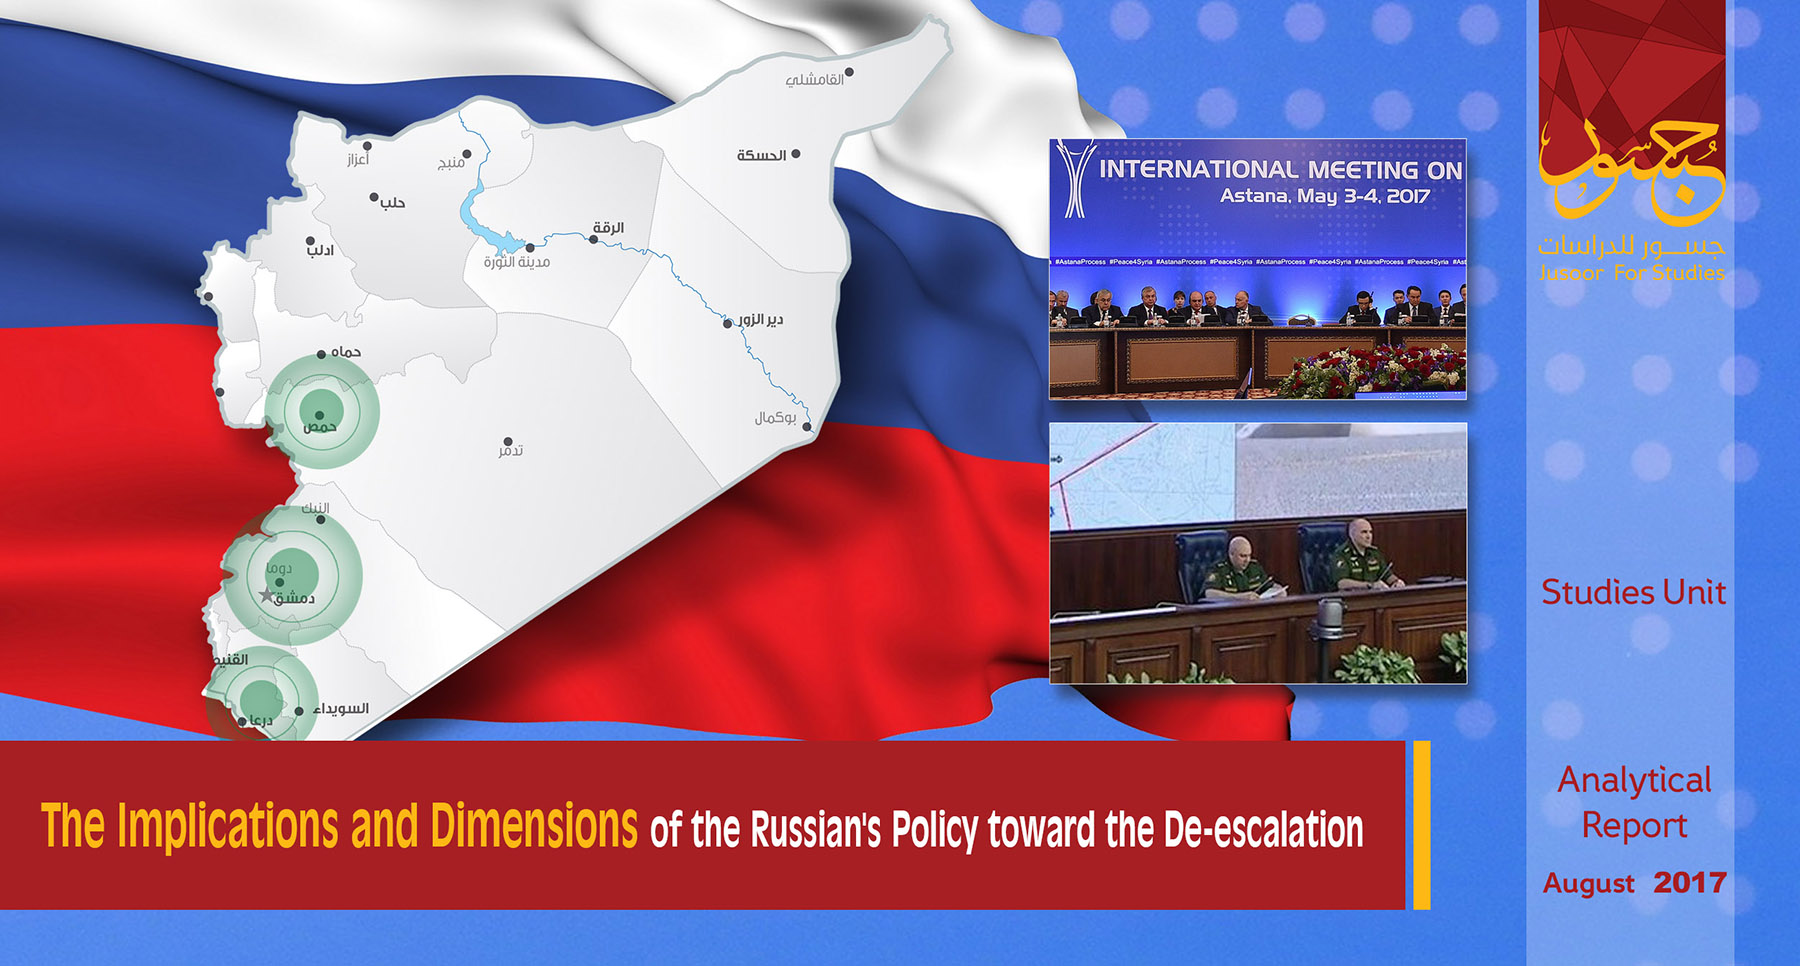  Implications and Dimensions of the Russian Policy toward the De-escalation in Syria